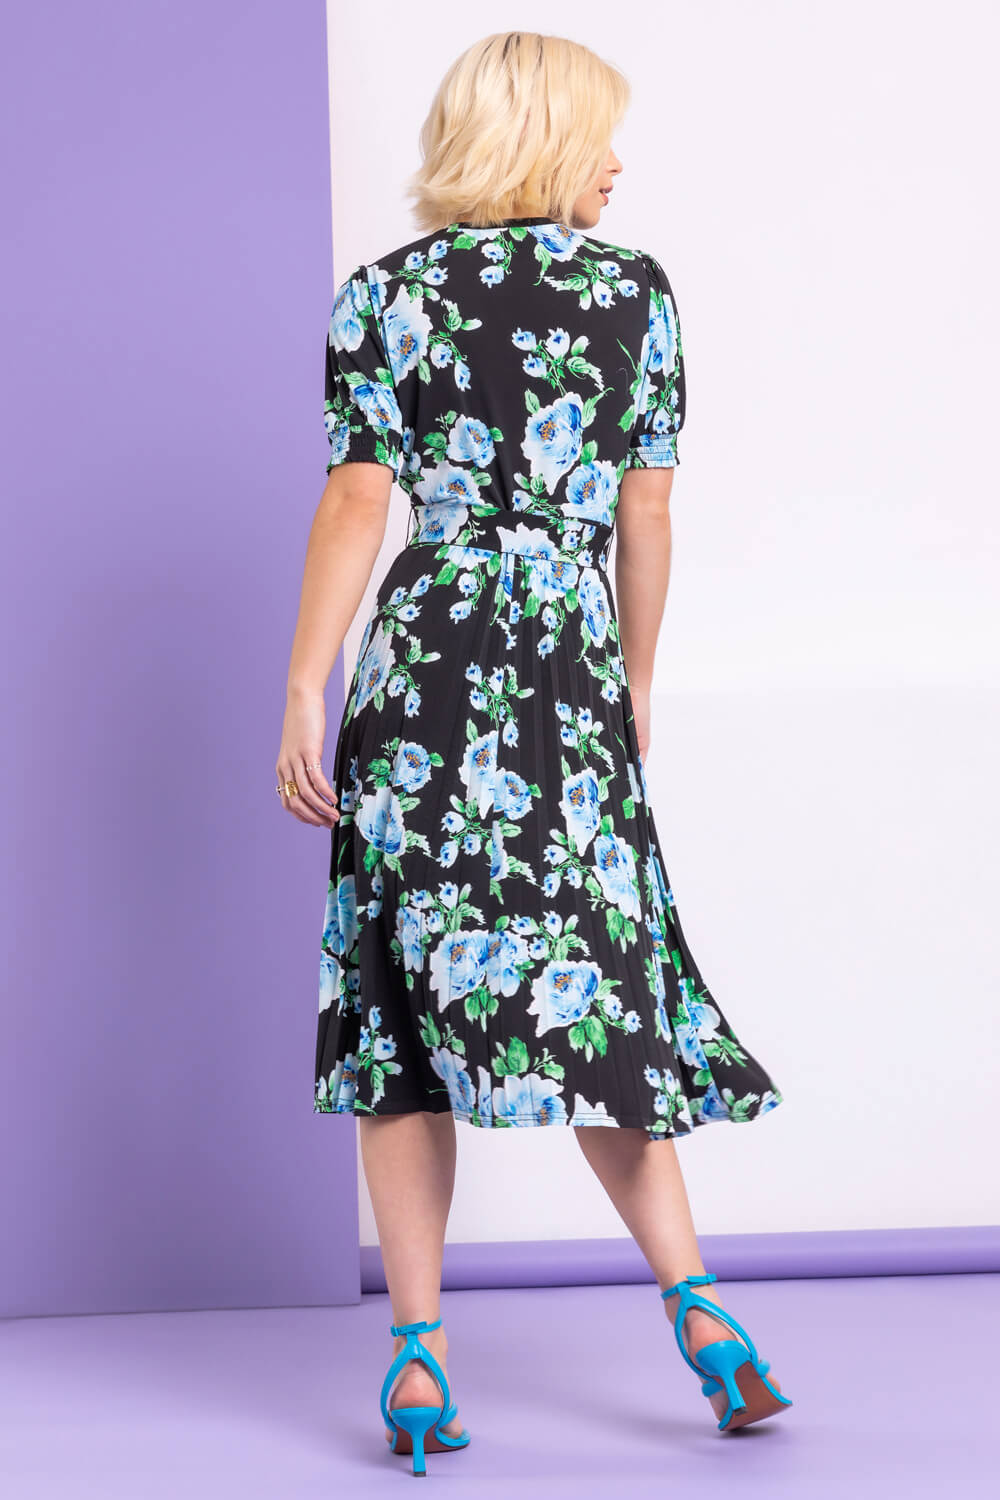 Black Floral Pleated Fit & Flare Dress, Image 2 of 5